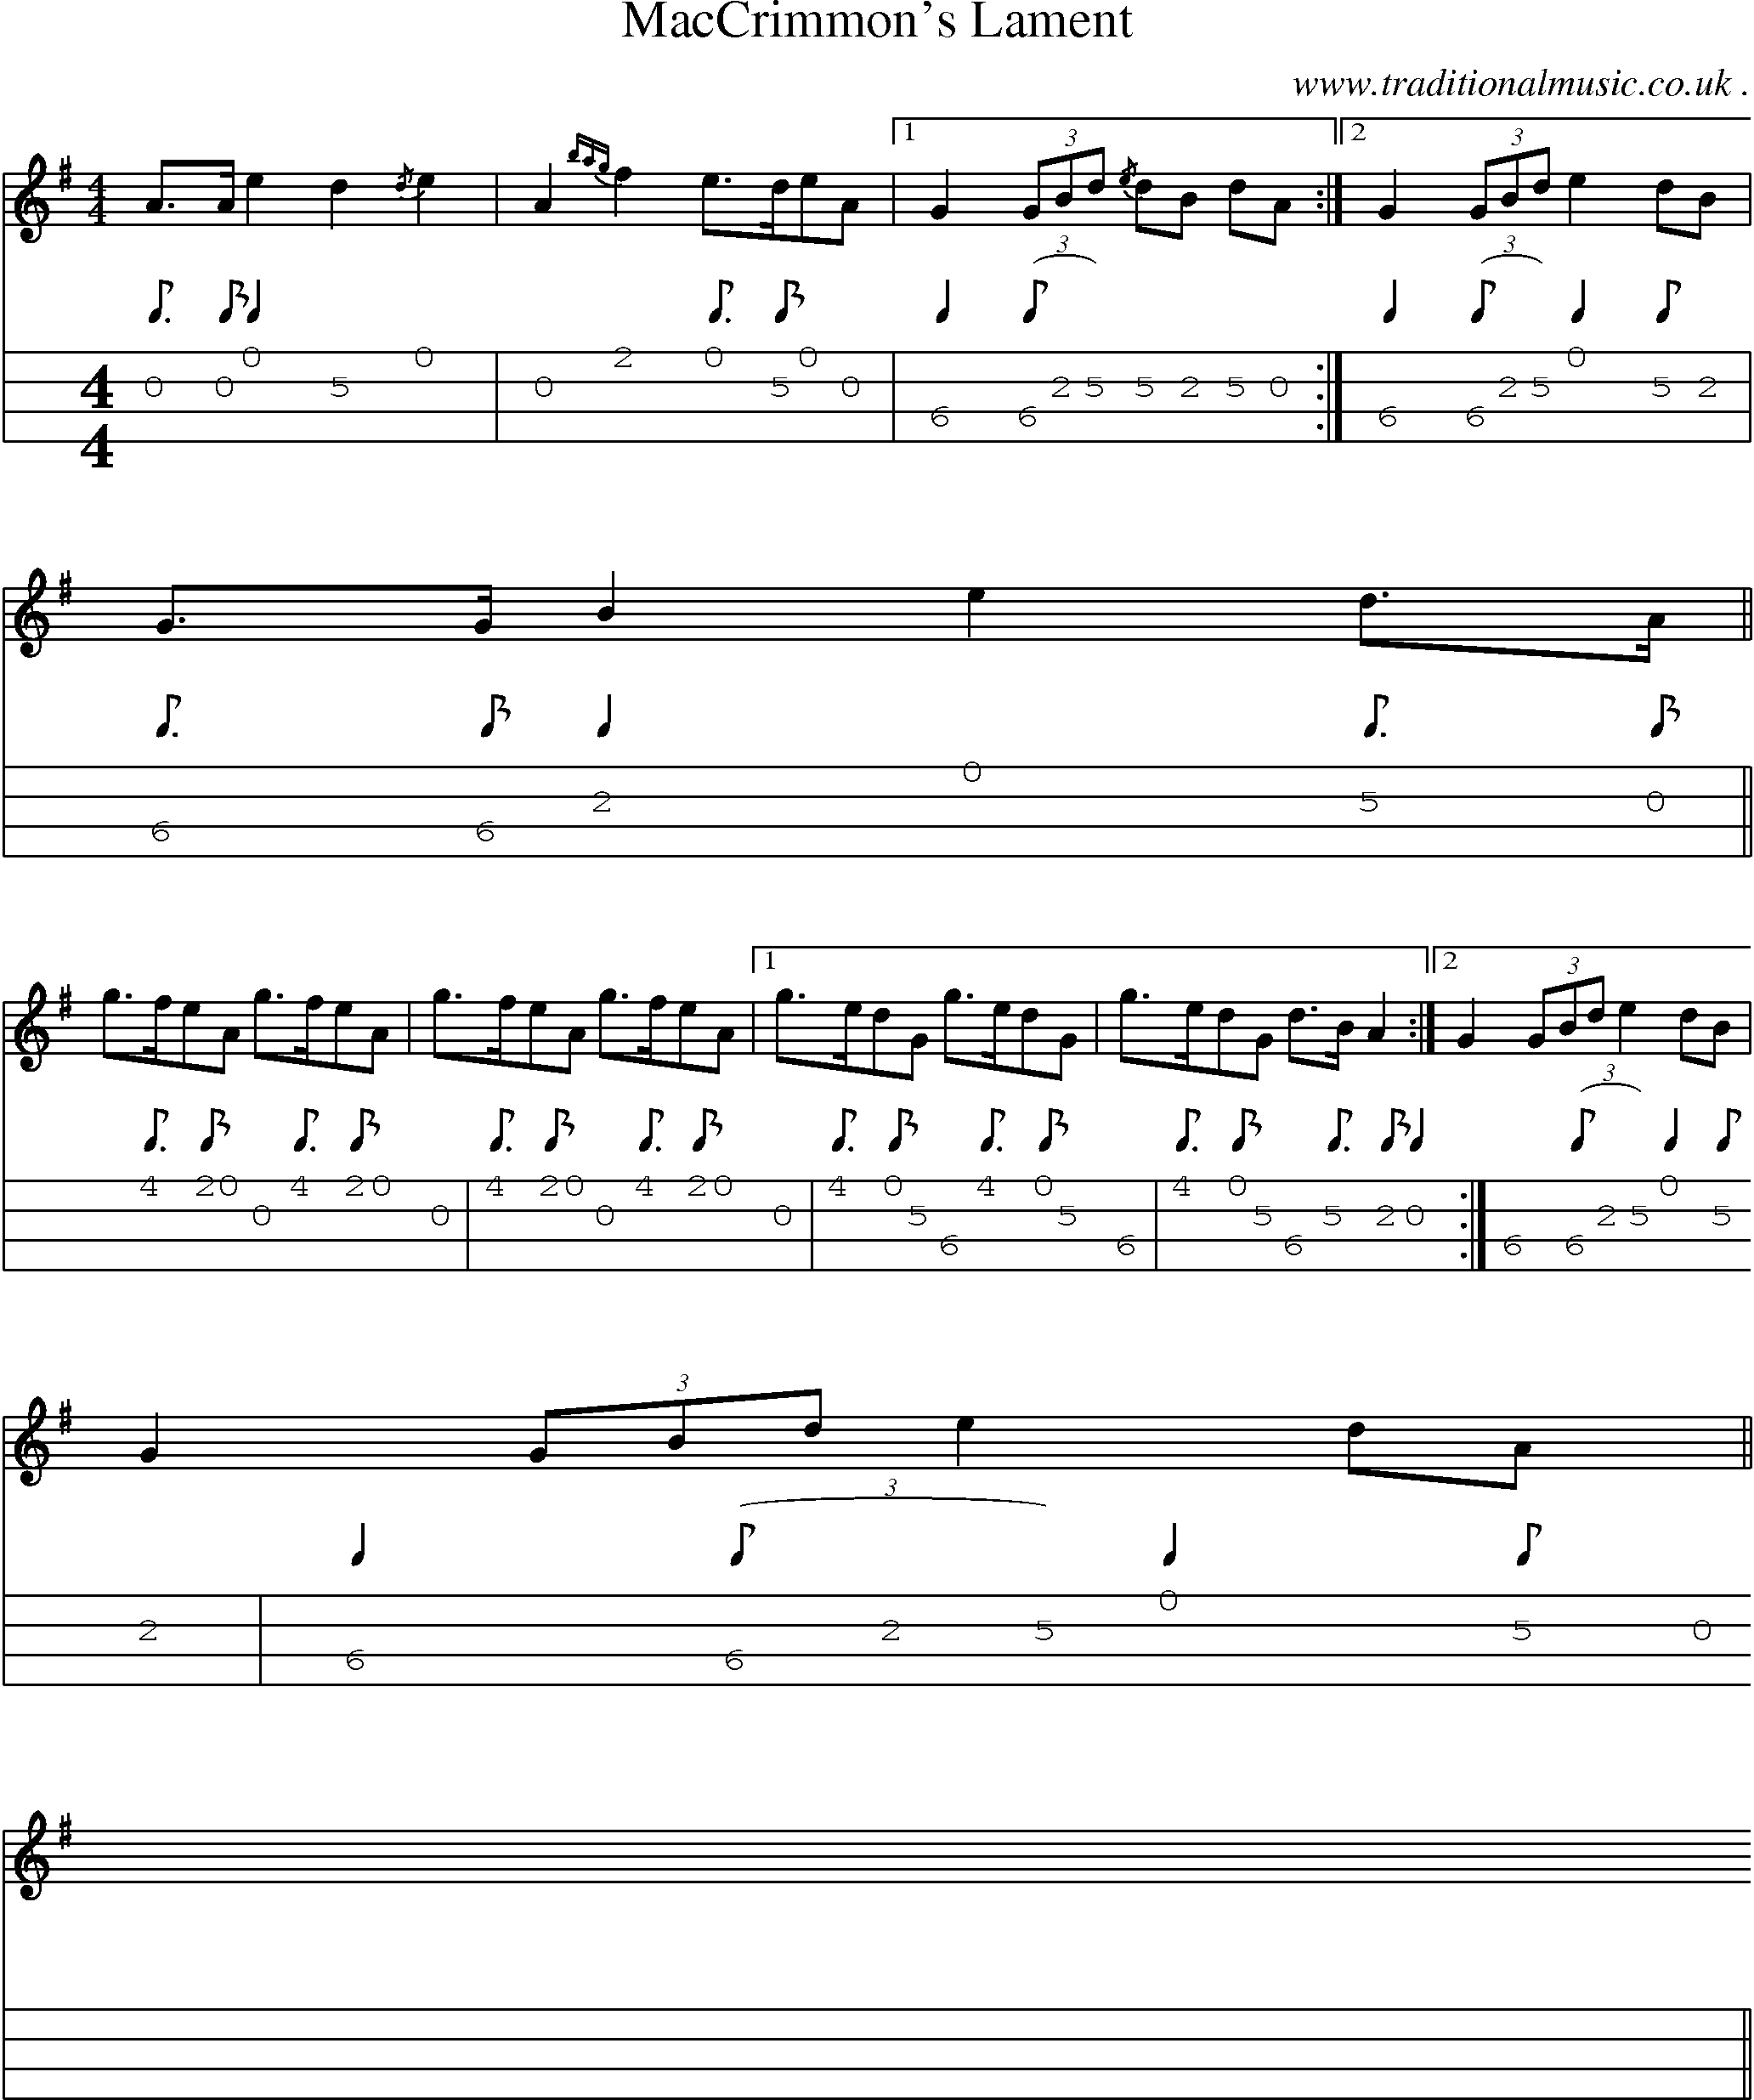 Sheet-music  score, Chords and Mandolin Tabs for Maccrimmons Lament